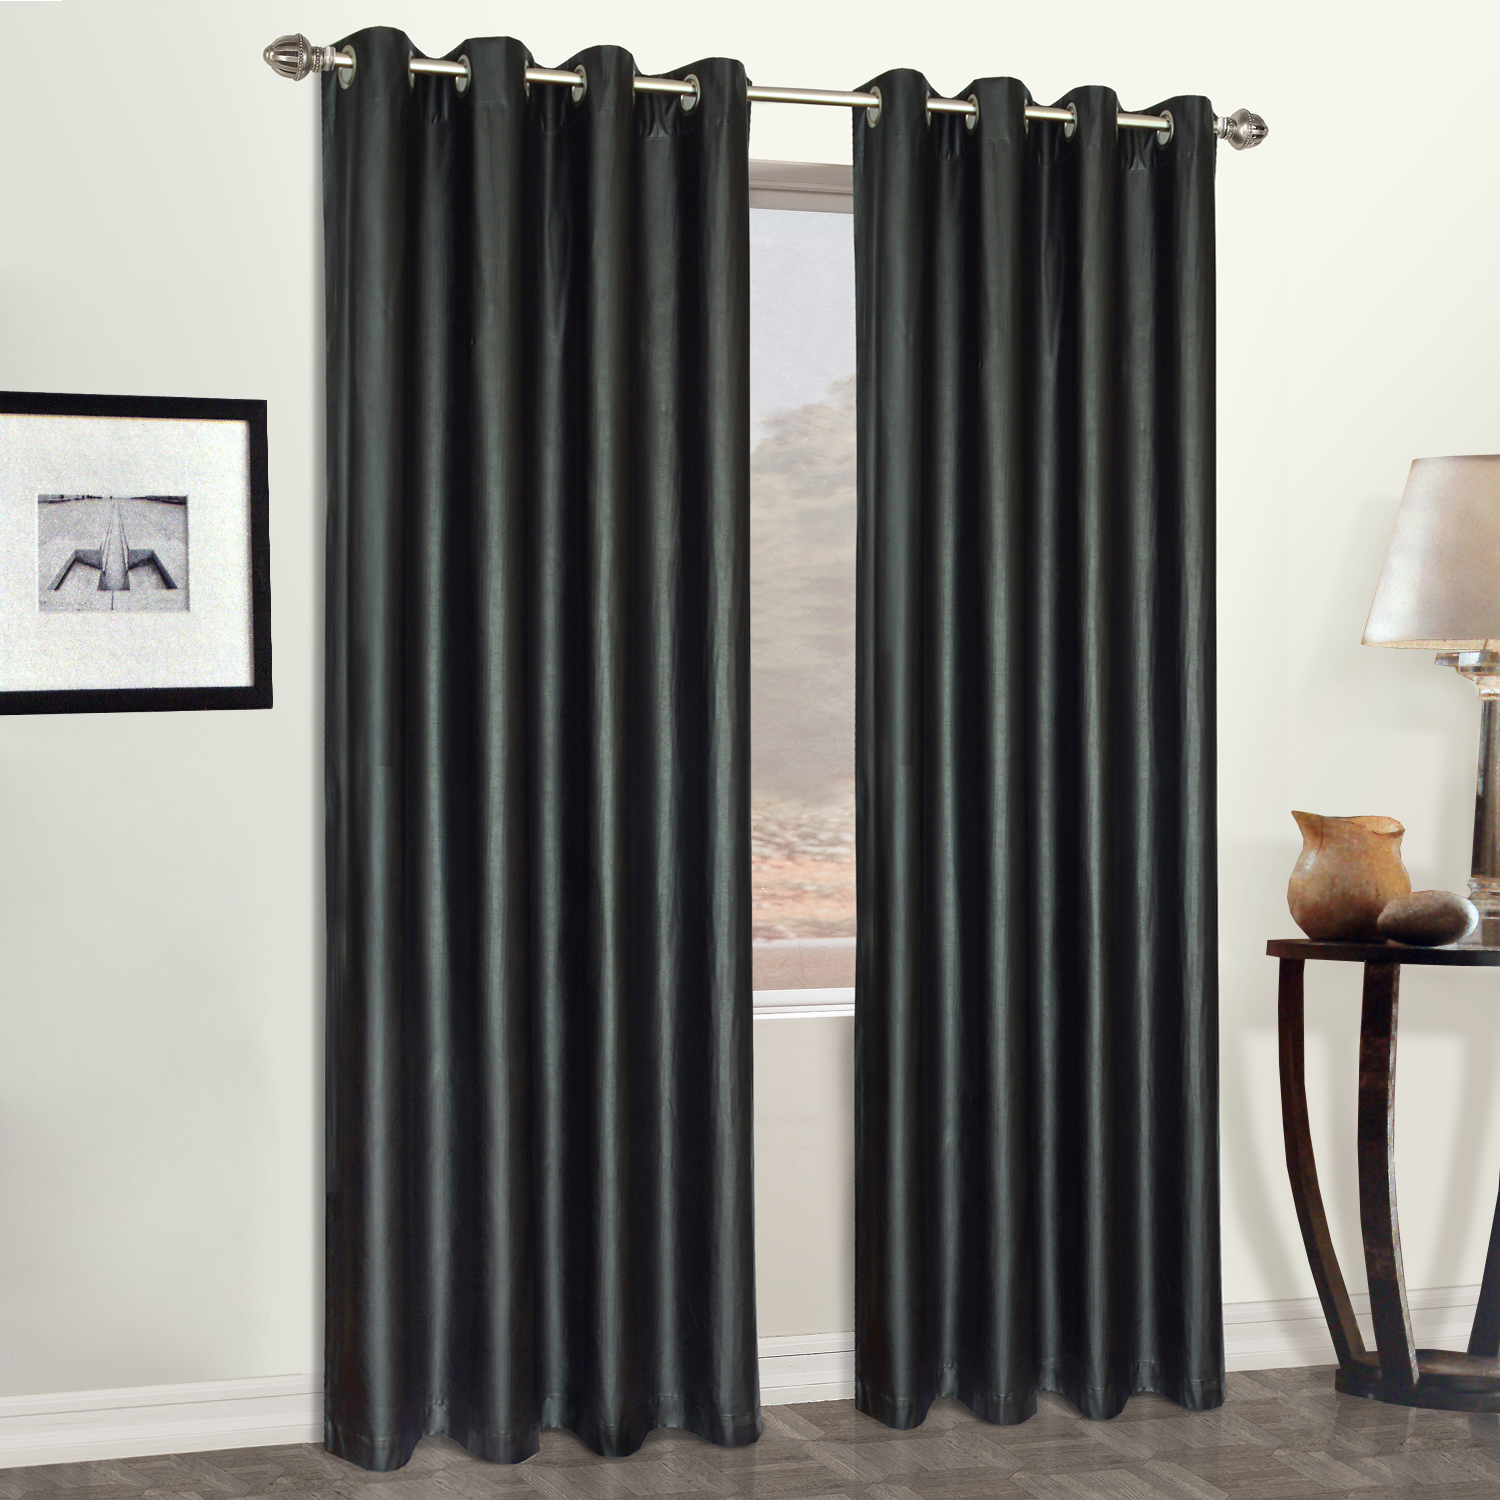 United Curtain Company Faux Leather panel with grommet top